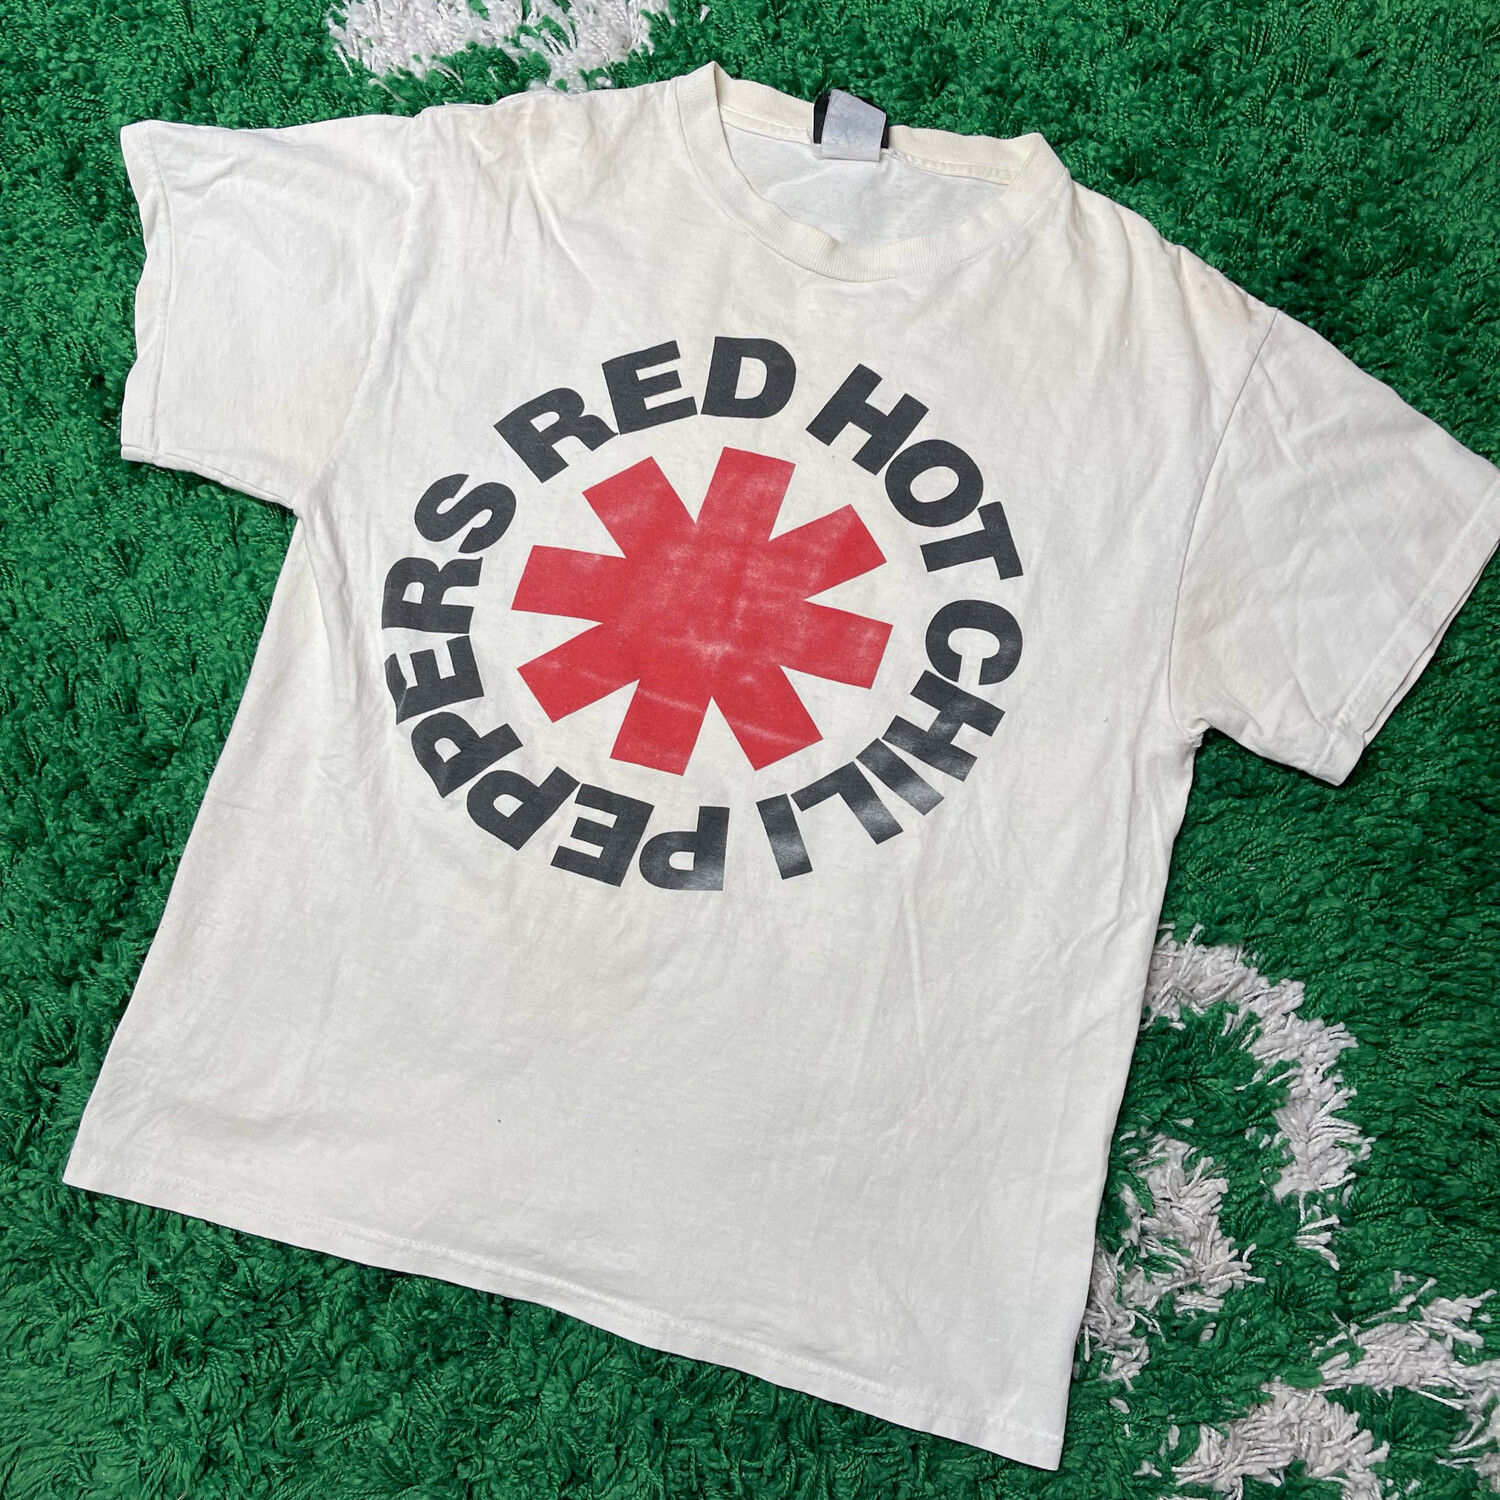 Red Hot Chili Peppers 90s Tee Size Medium